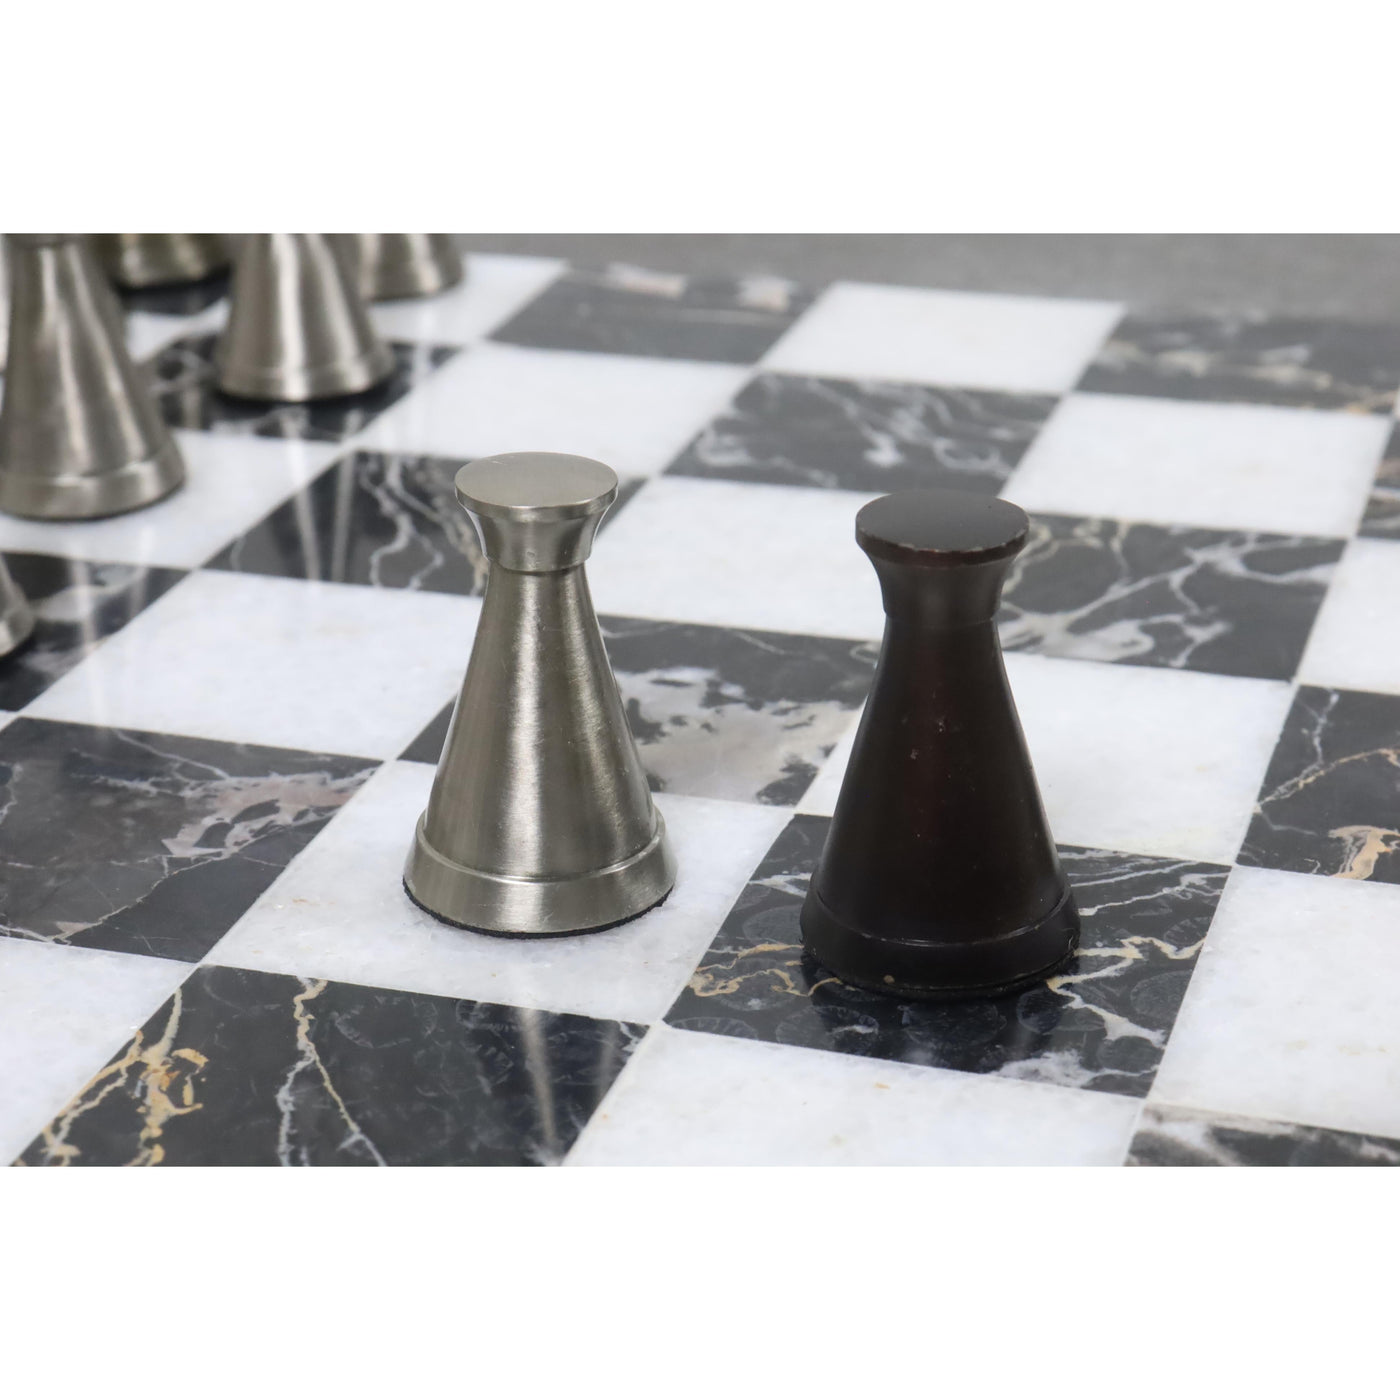 Brass Chess Set combo of 3.1" Tower Chess Pieces